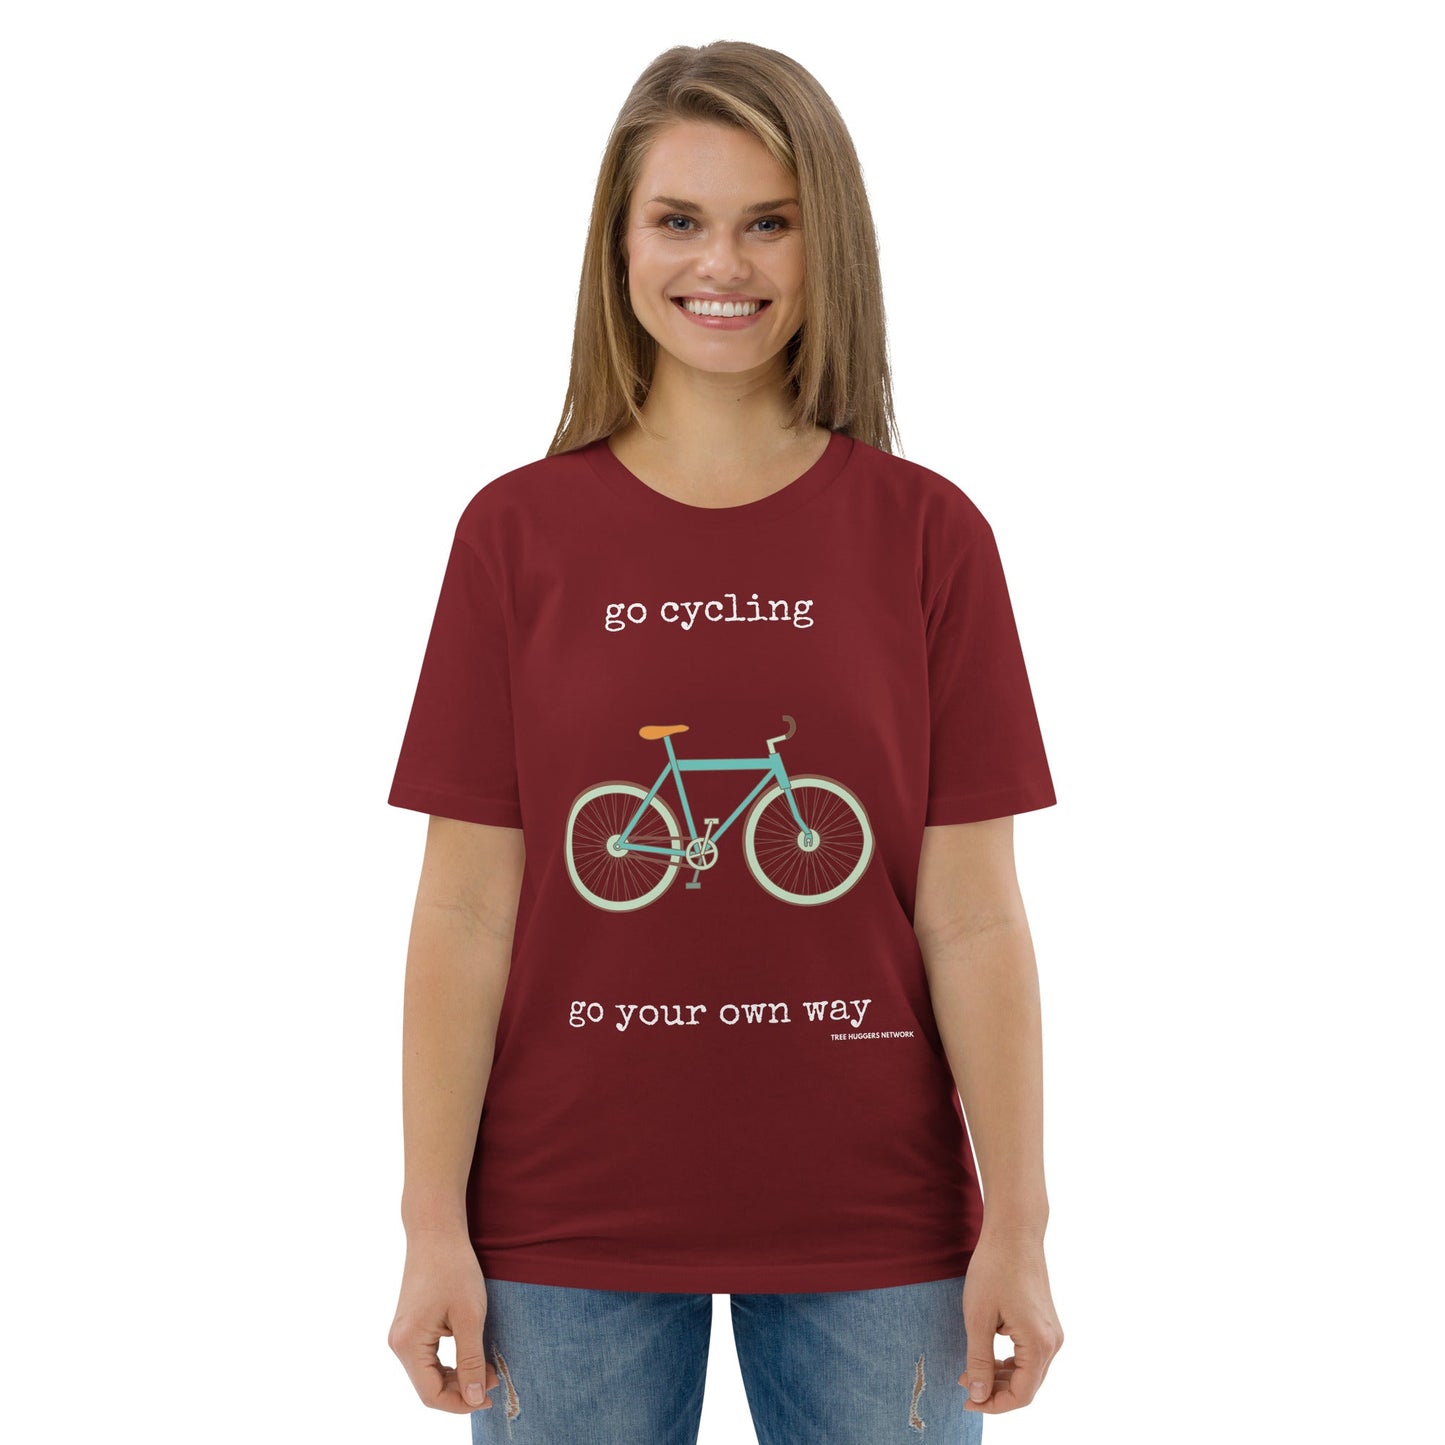 Unisex Organic Cotton T-shirt - go cycling, go your own way - Treehugger network